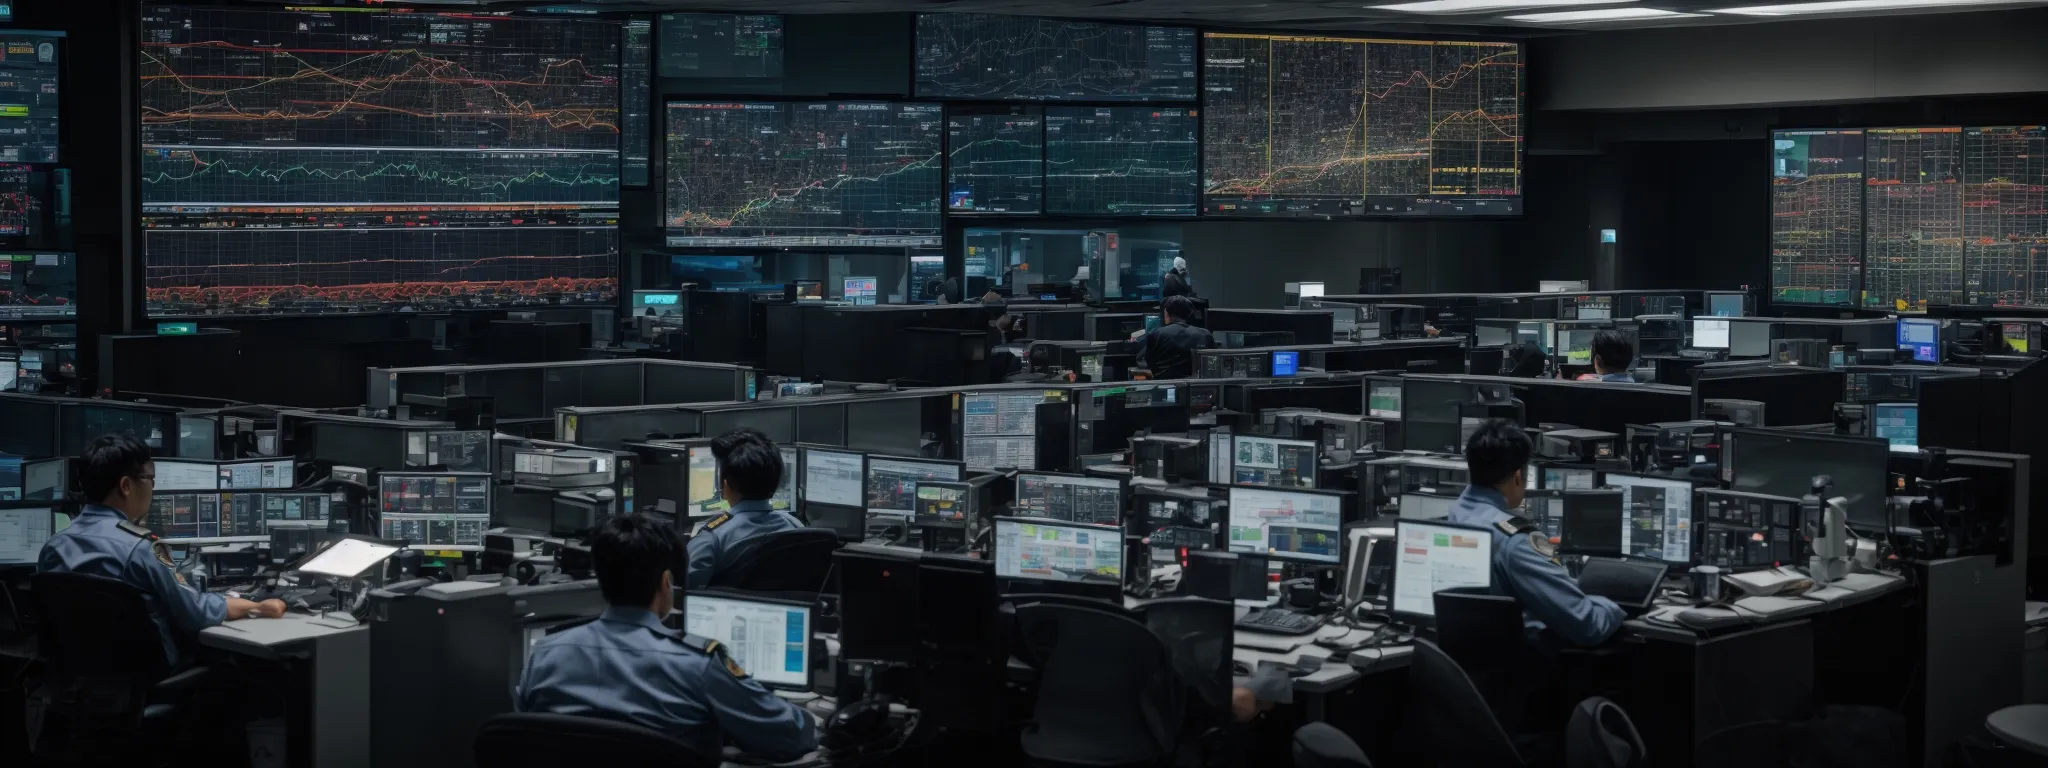 a busy traffic control center with multiple screens displaying real-time traffic maps and charts.